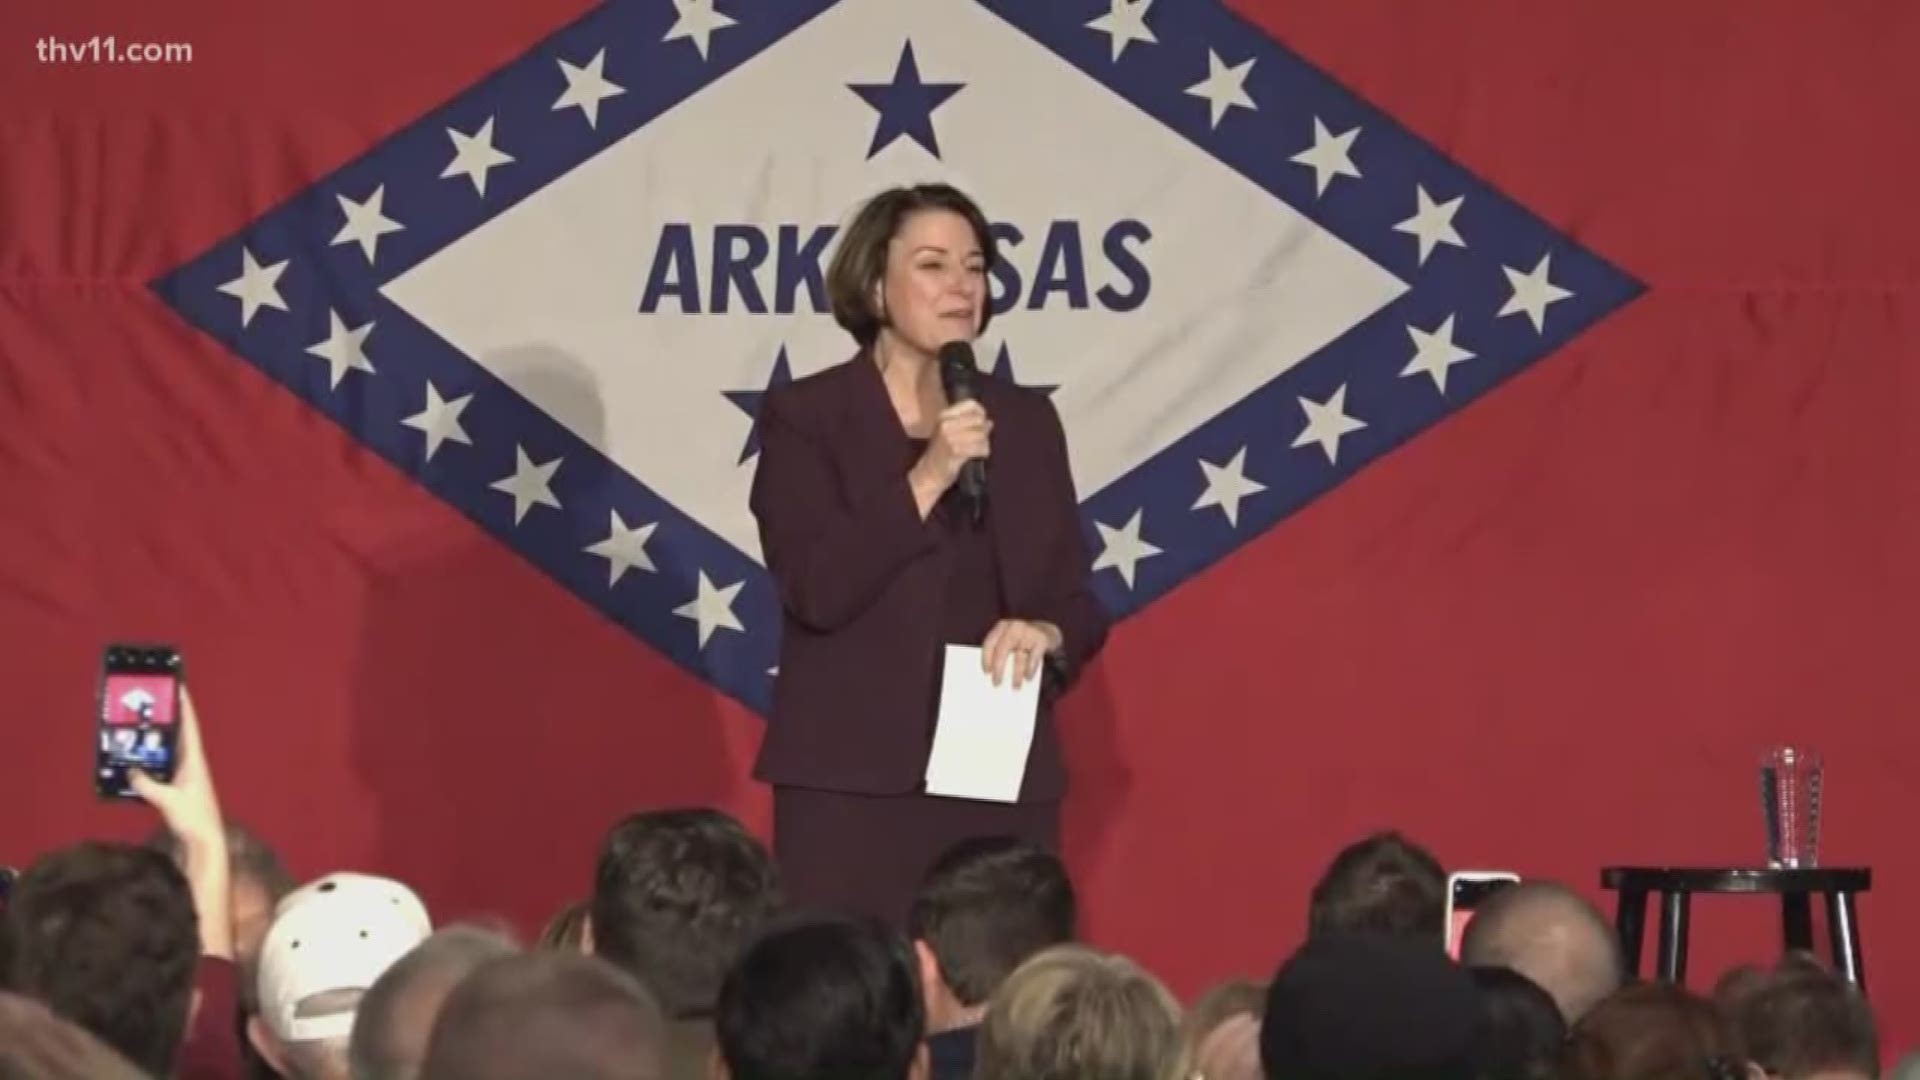 As Super Tuesday nears, Democratic presidential candidate Amy Klobuchar holds a rally in Maumelle to reach out to Arkansas voters.